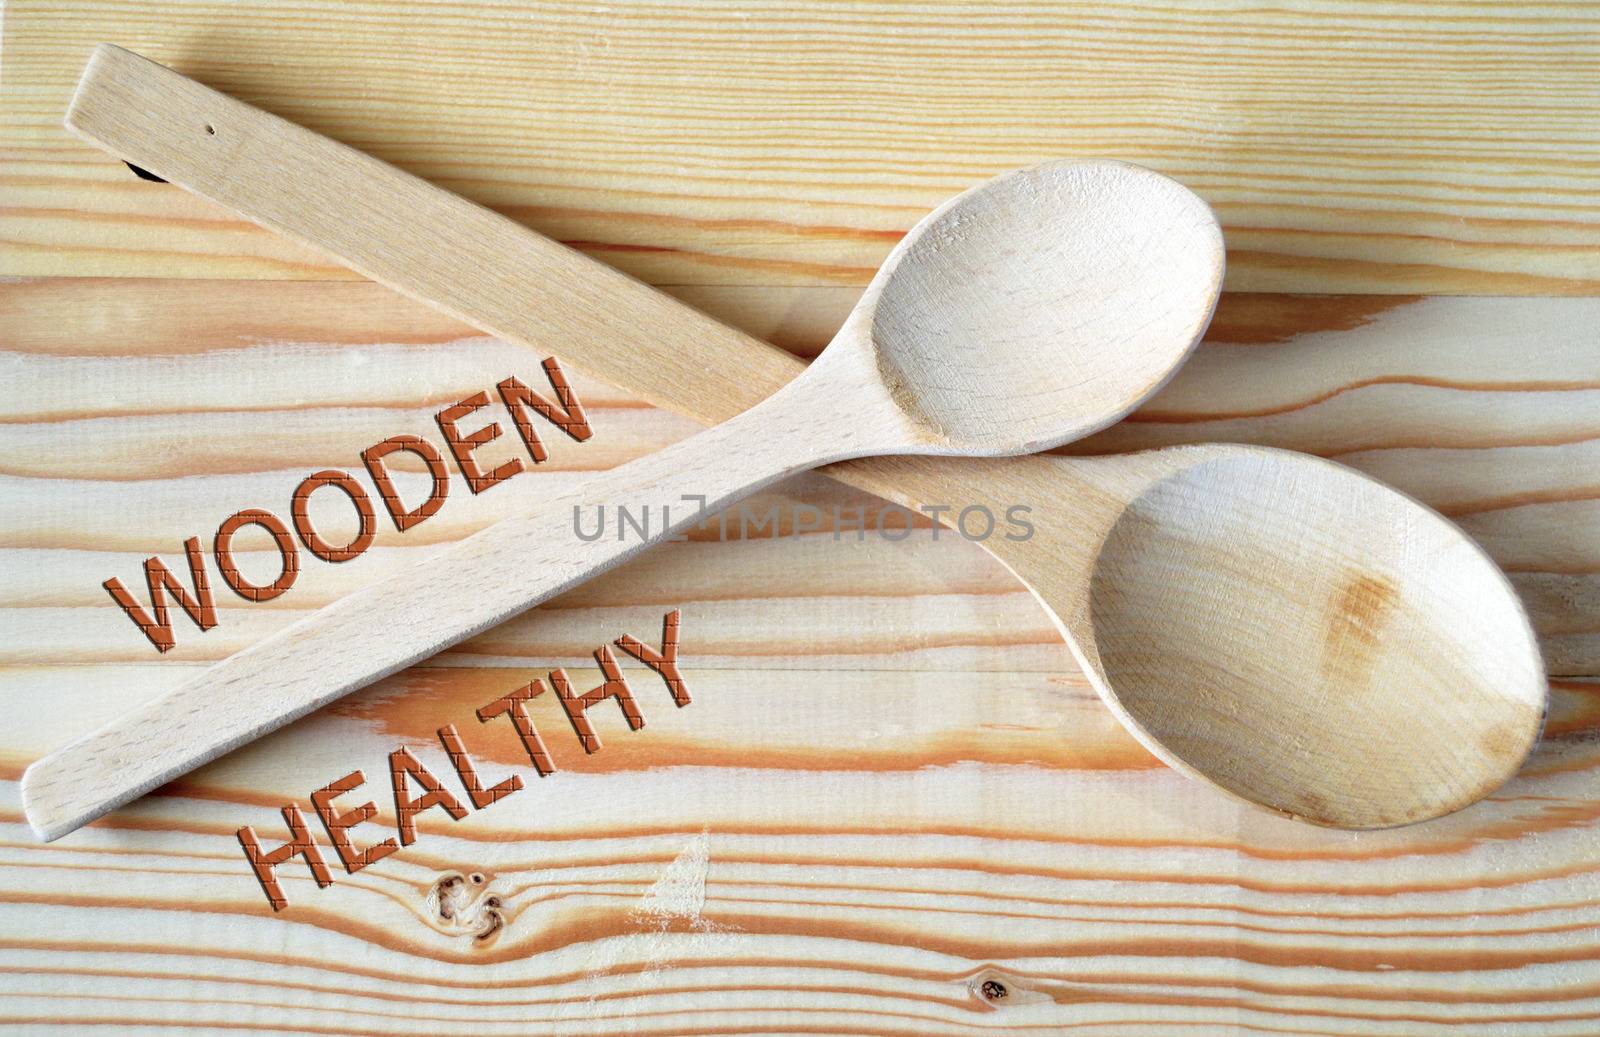 wooden spoon and timber products for health